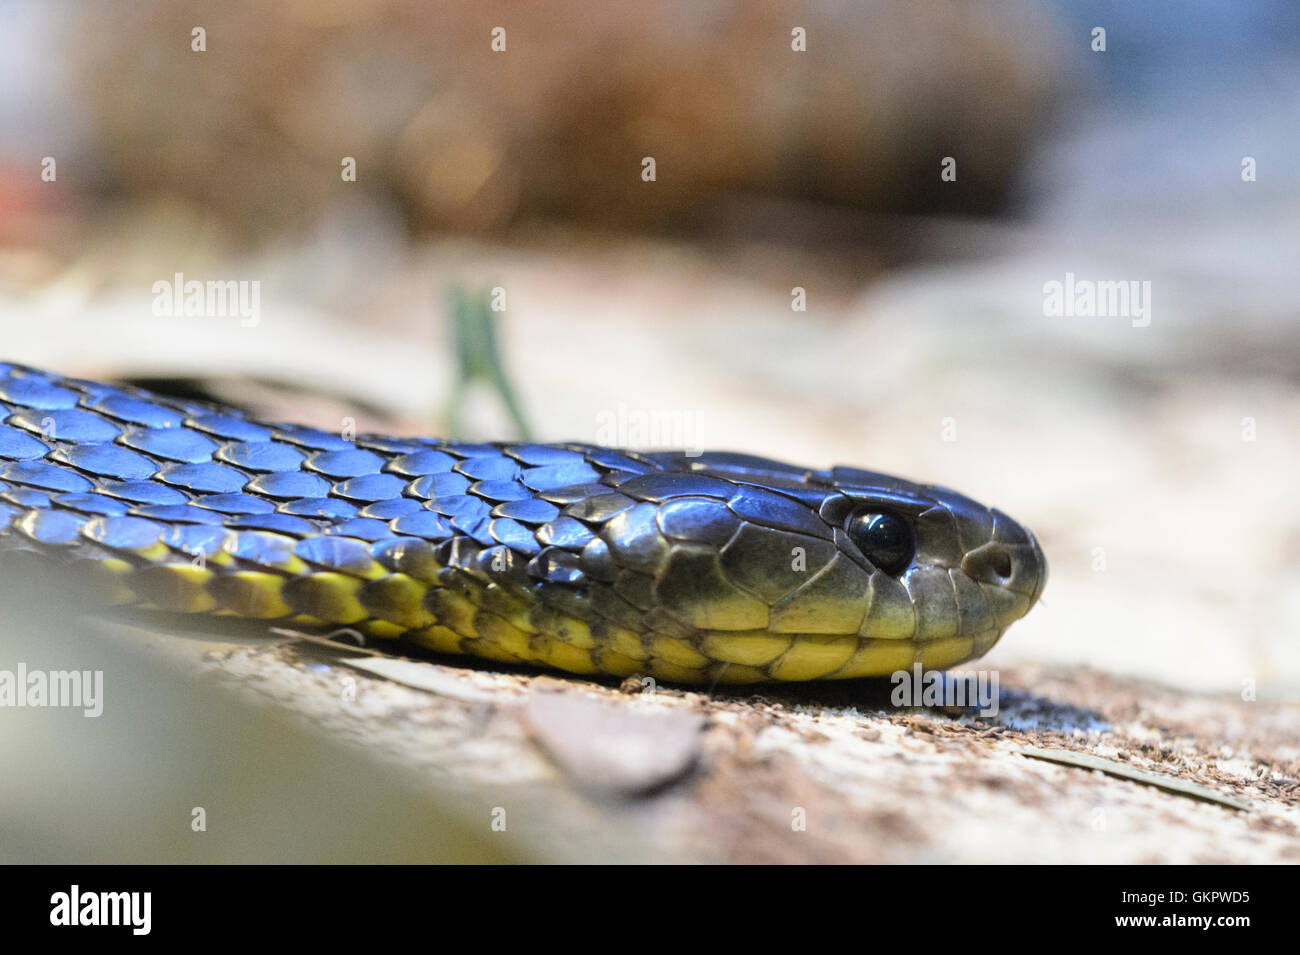 Tiger Snake (Notechis scutatus), Australia Tiger snakes are a type of venomous snake found in southern regions of Australia Stock Photo